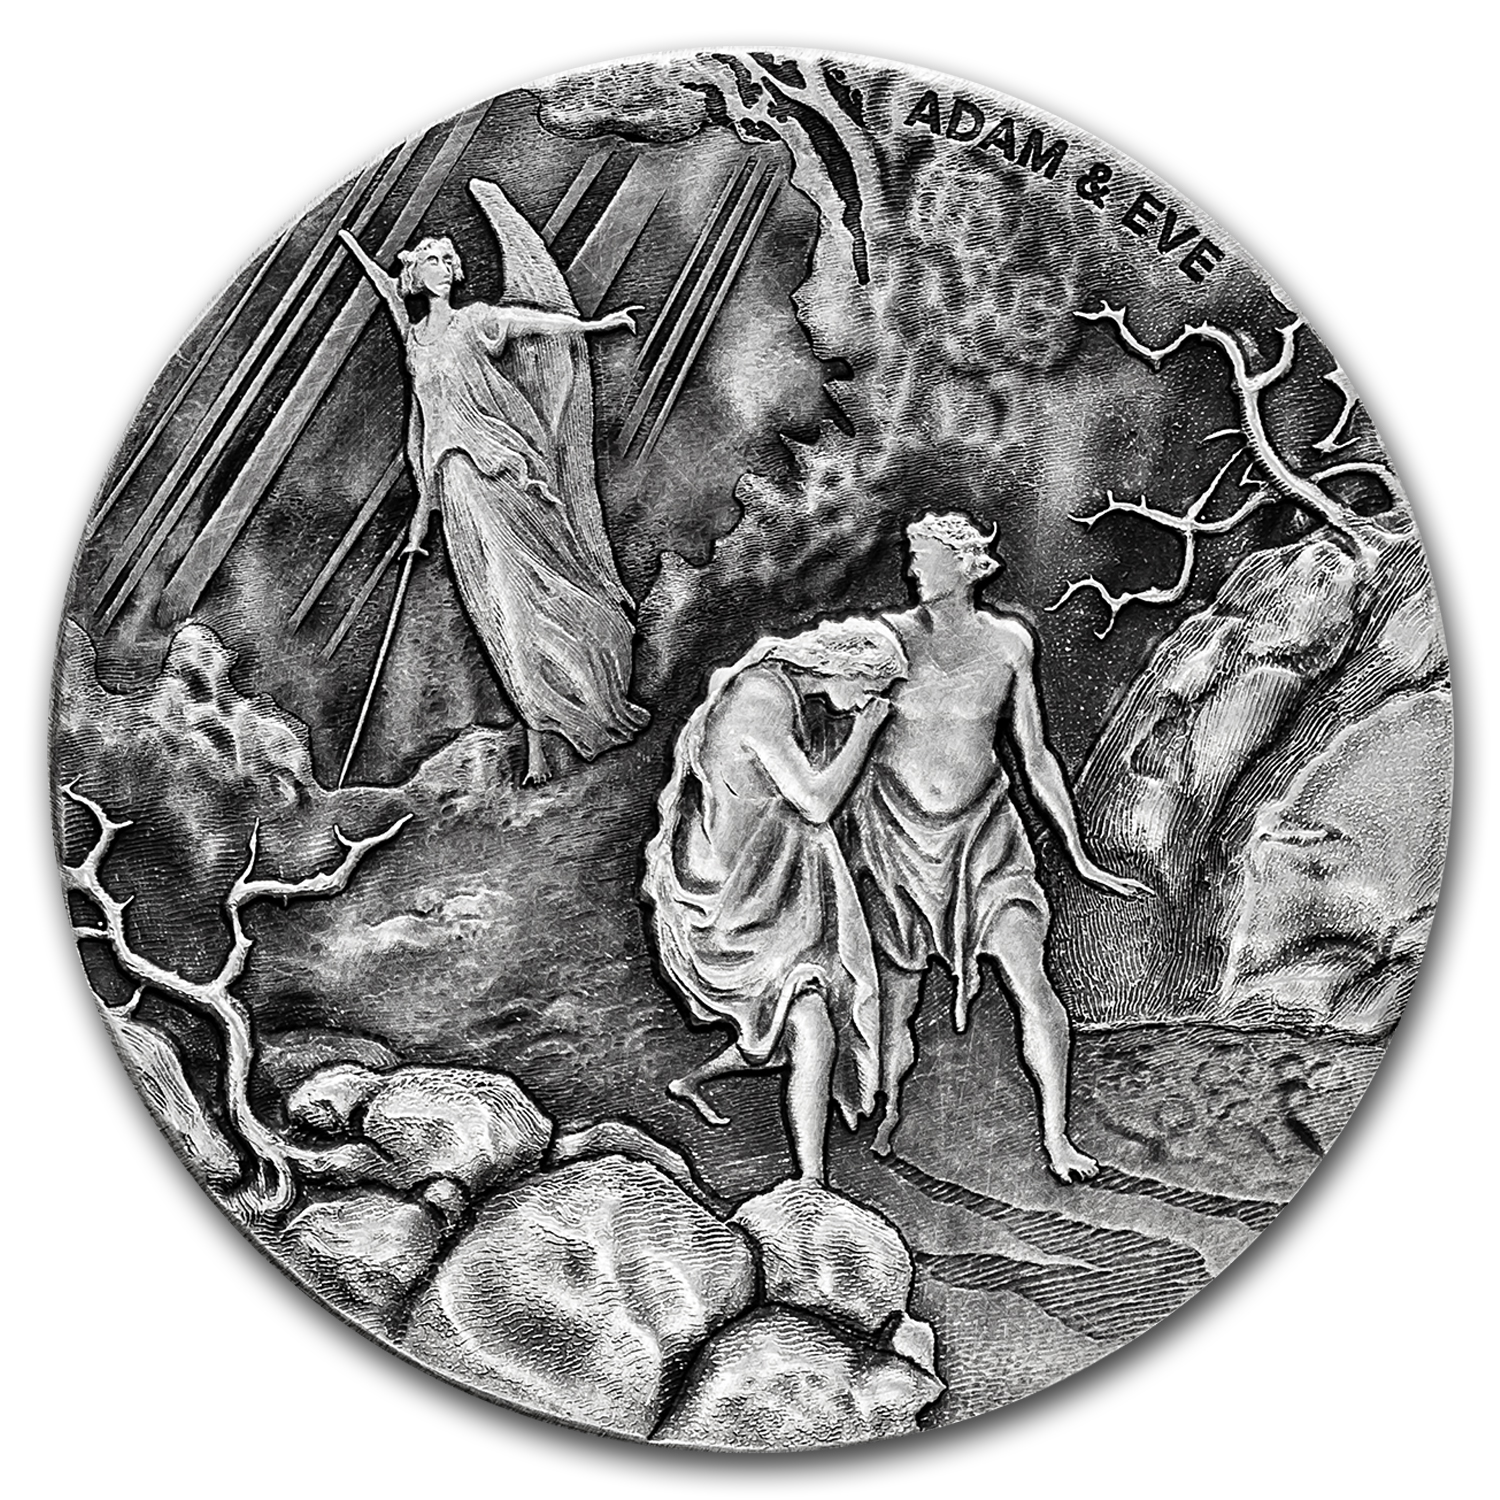 Buy 2016 2 oz Silver Coin - Biblical Series (Adam and Eve) - Click Image to Close